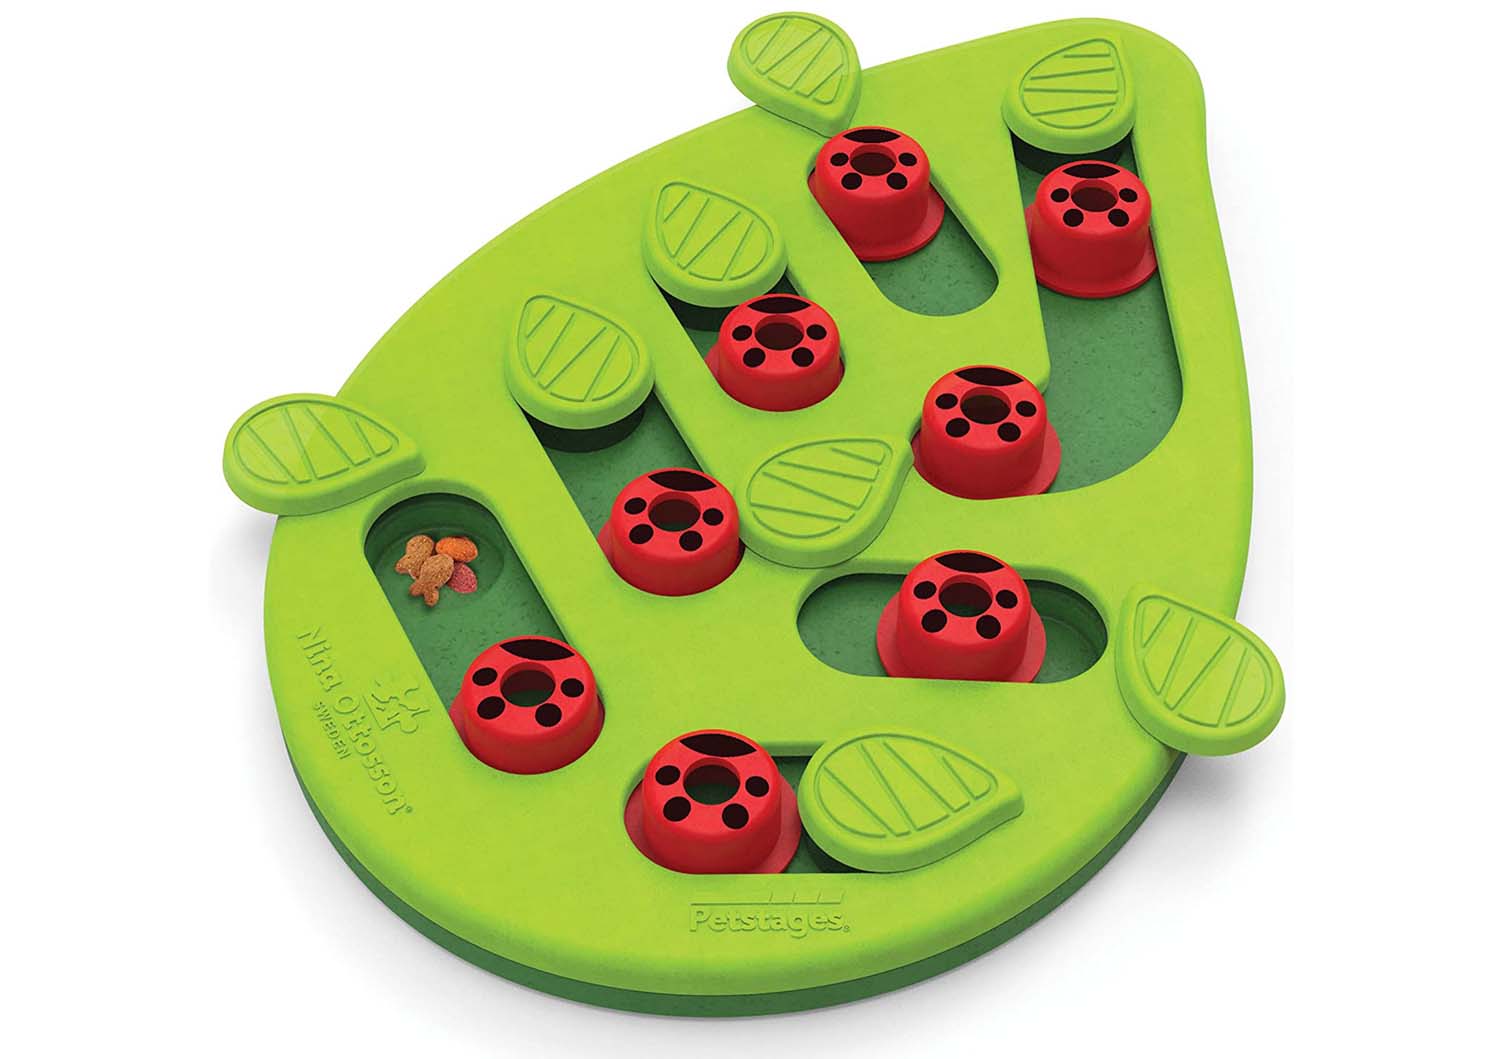 petstages nina ottosson buggin out puzzle